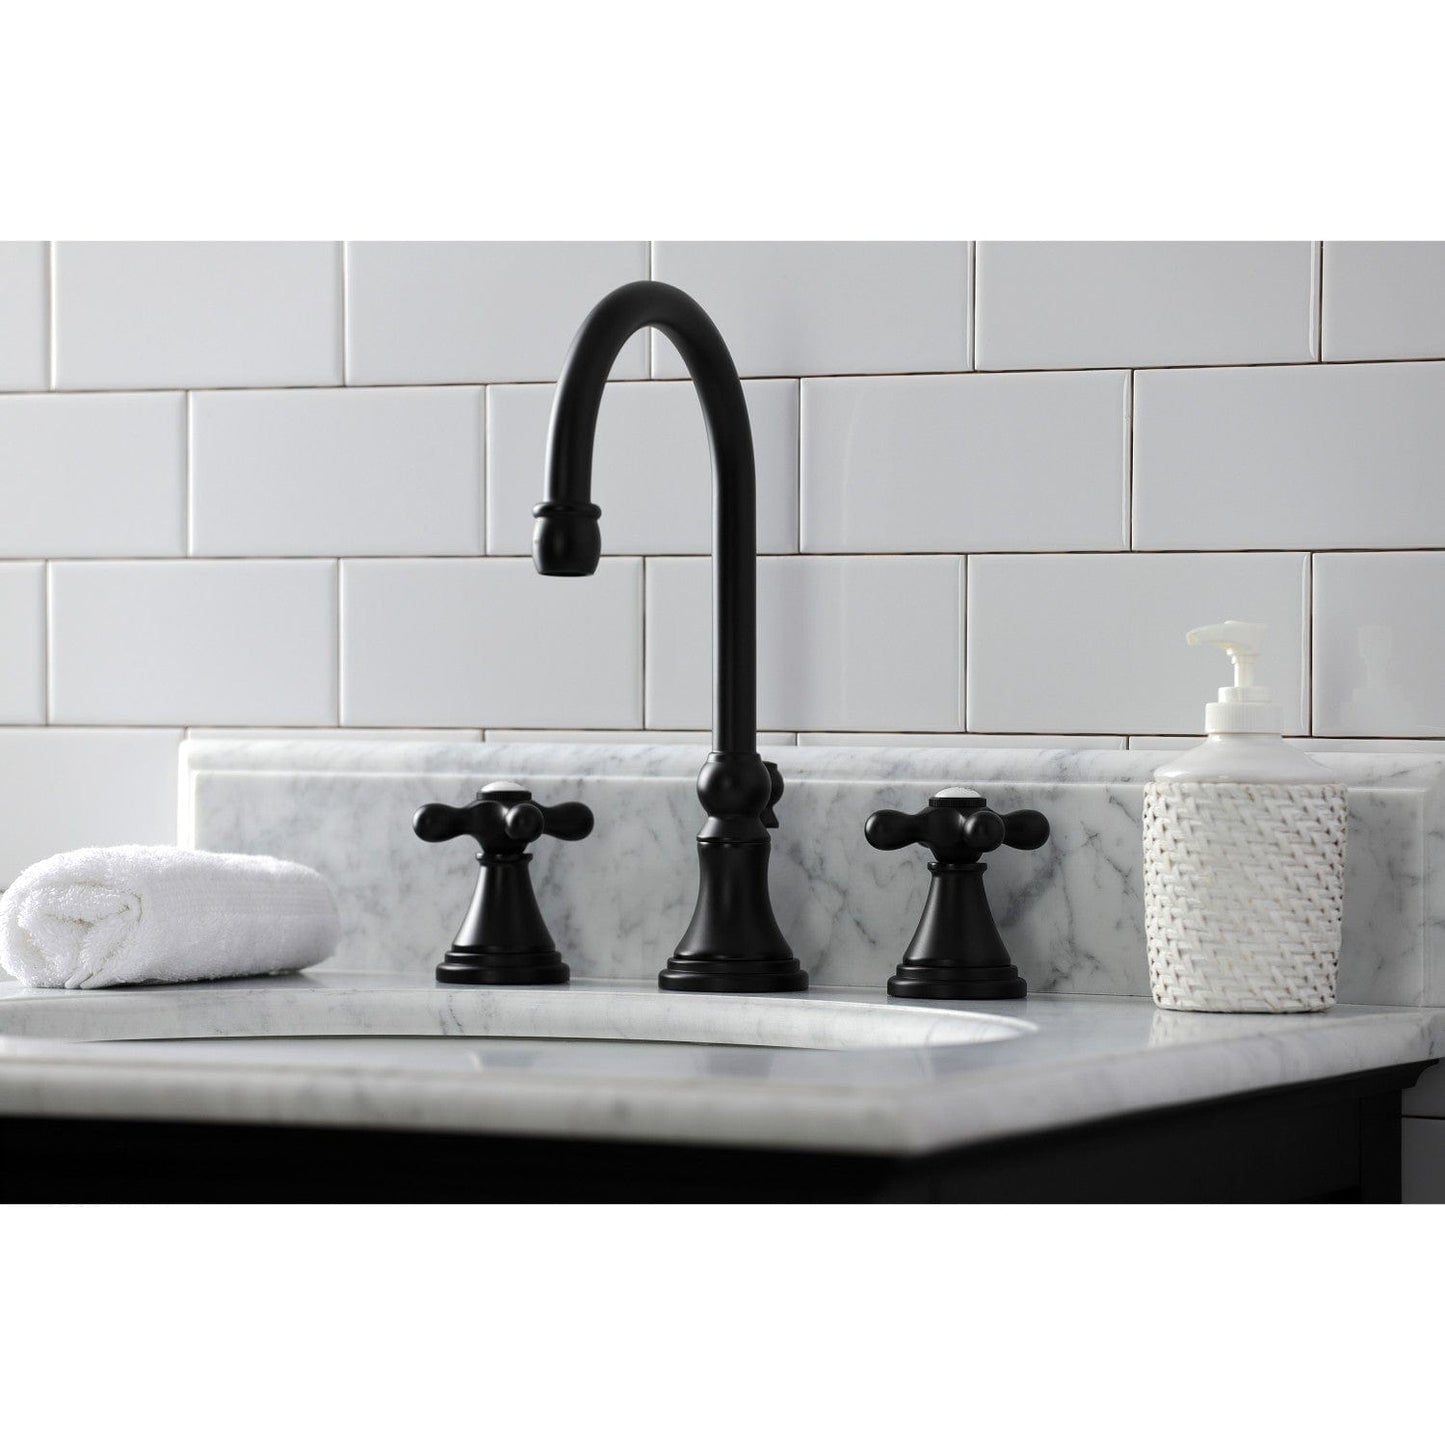 KINGSTON Brass Governor Widespread Bathroom Faucet with Brass Pop-Up - Matte Black